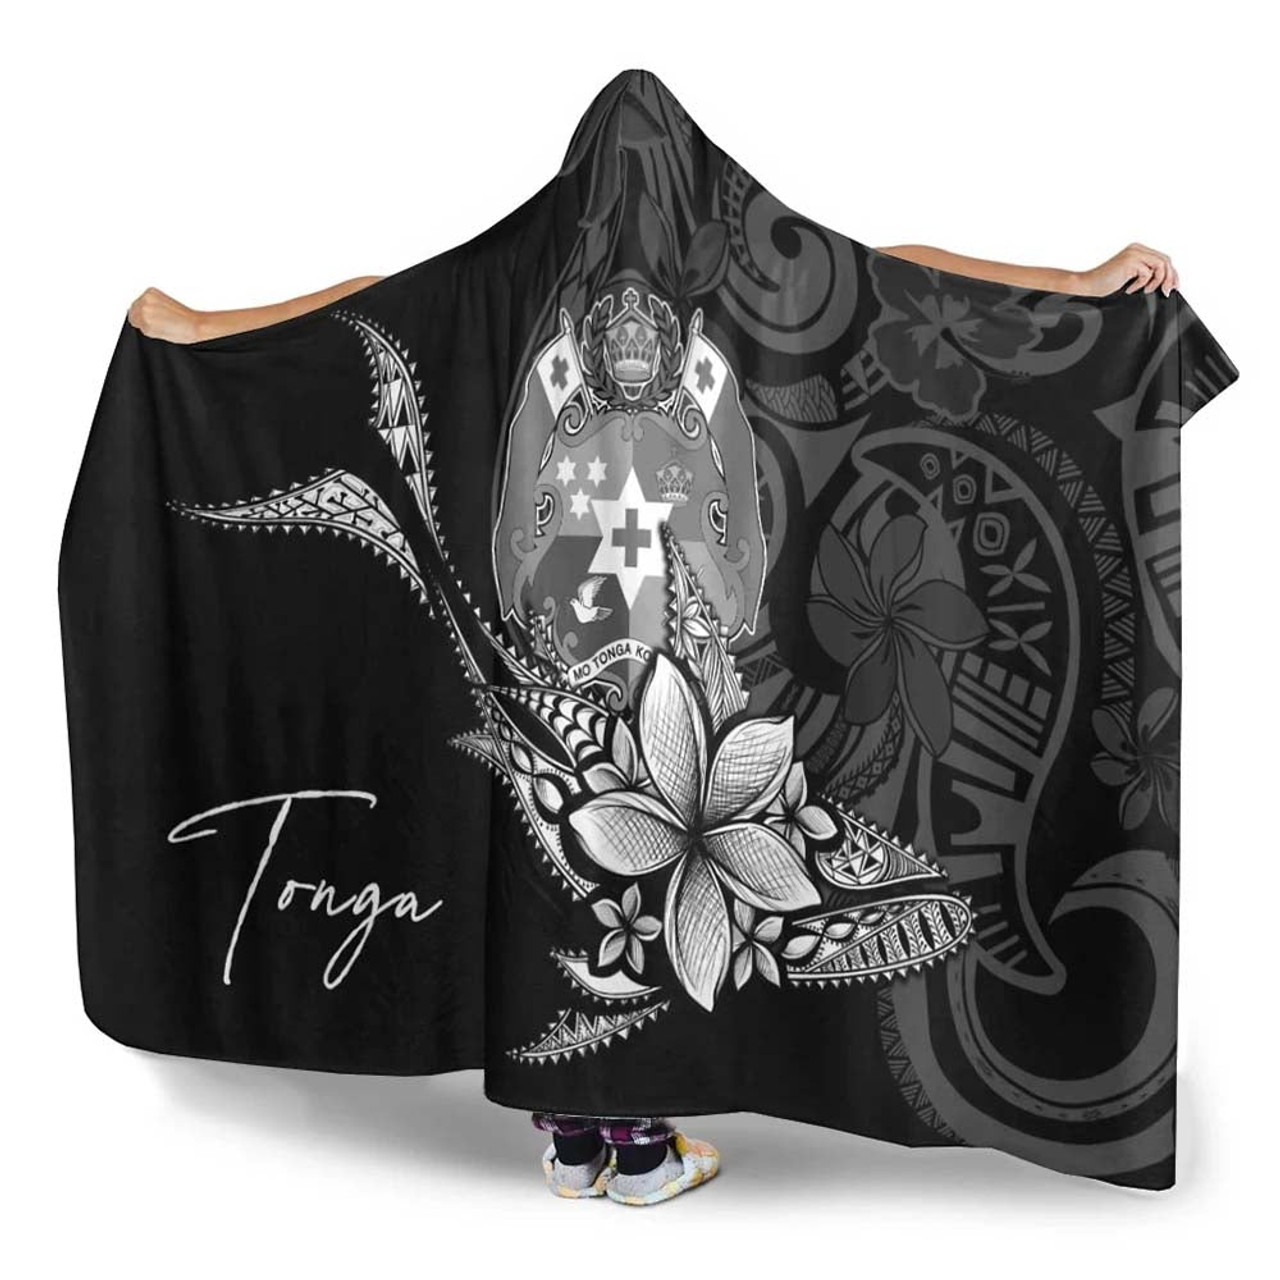 Tonga Hooded Blanket - Fish With Plumeria Flowers Style 3